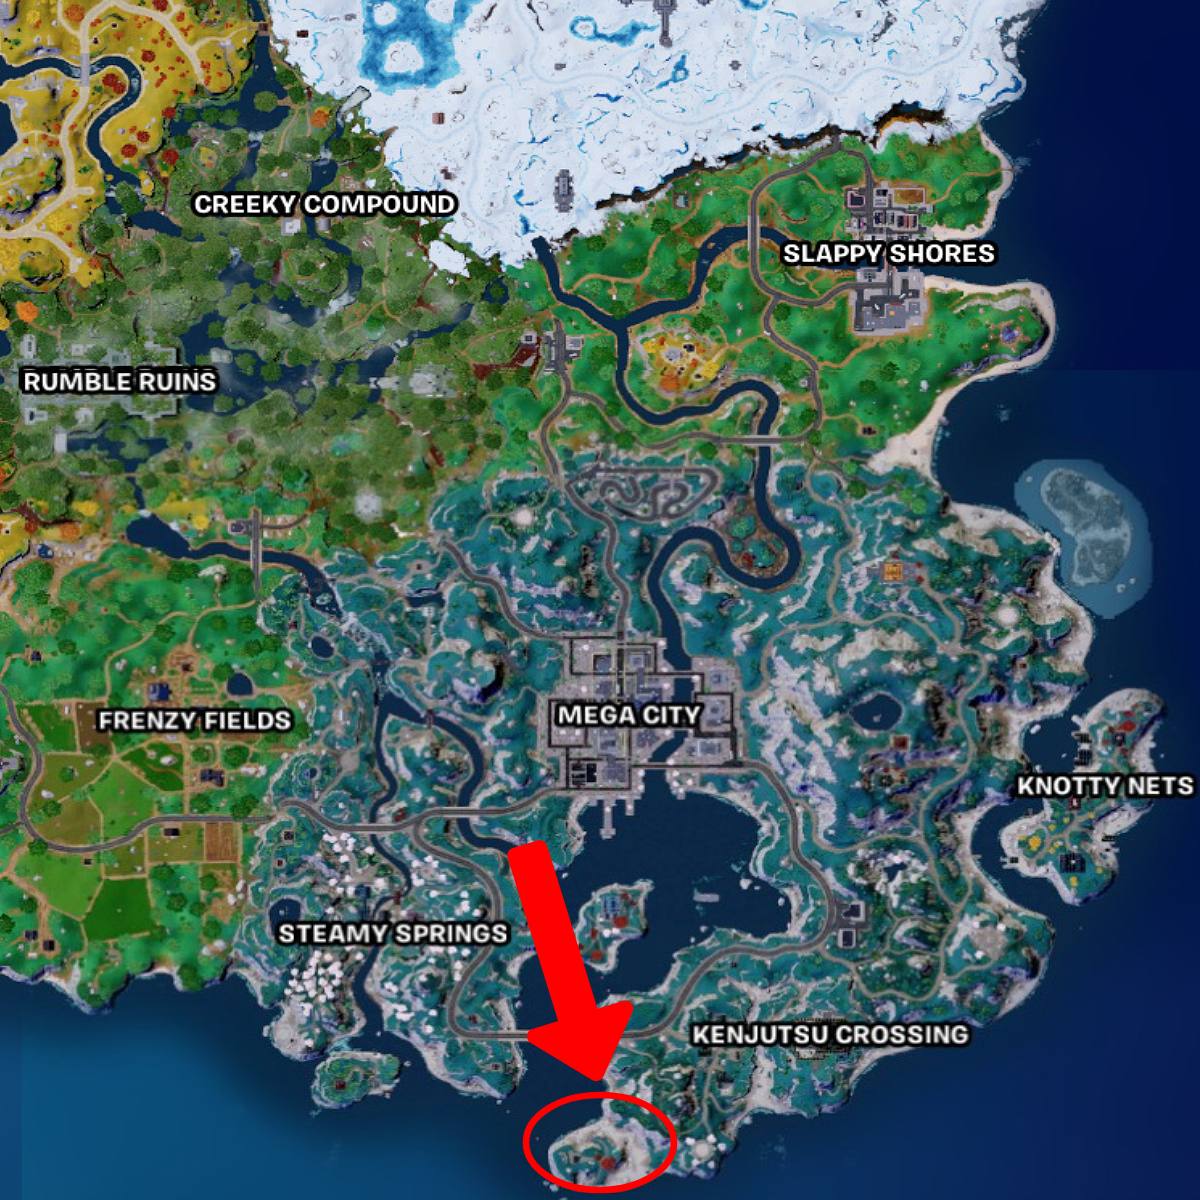 The location of Stones in Fortnite